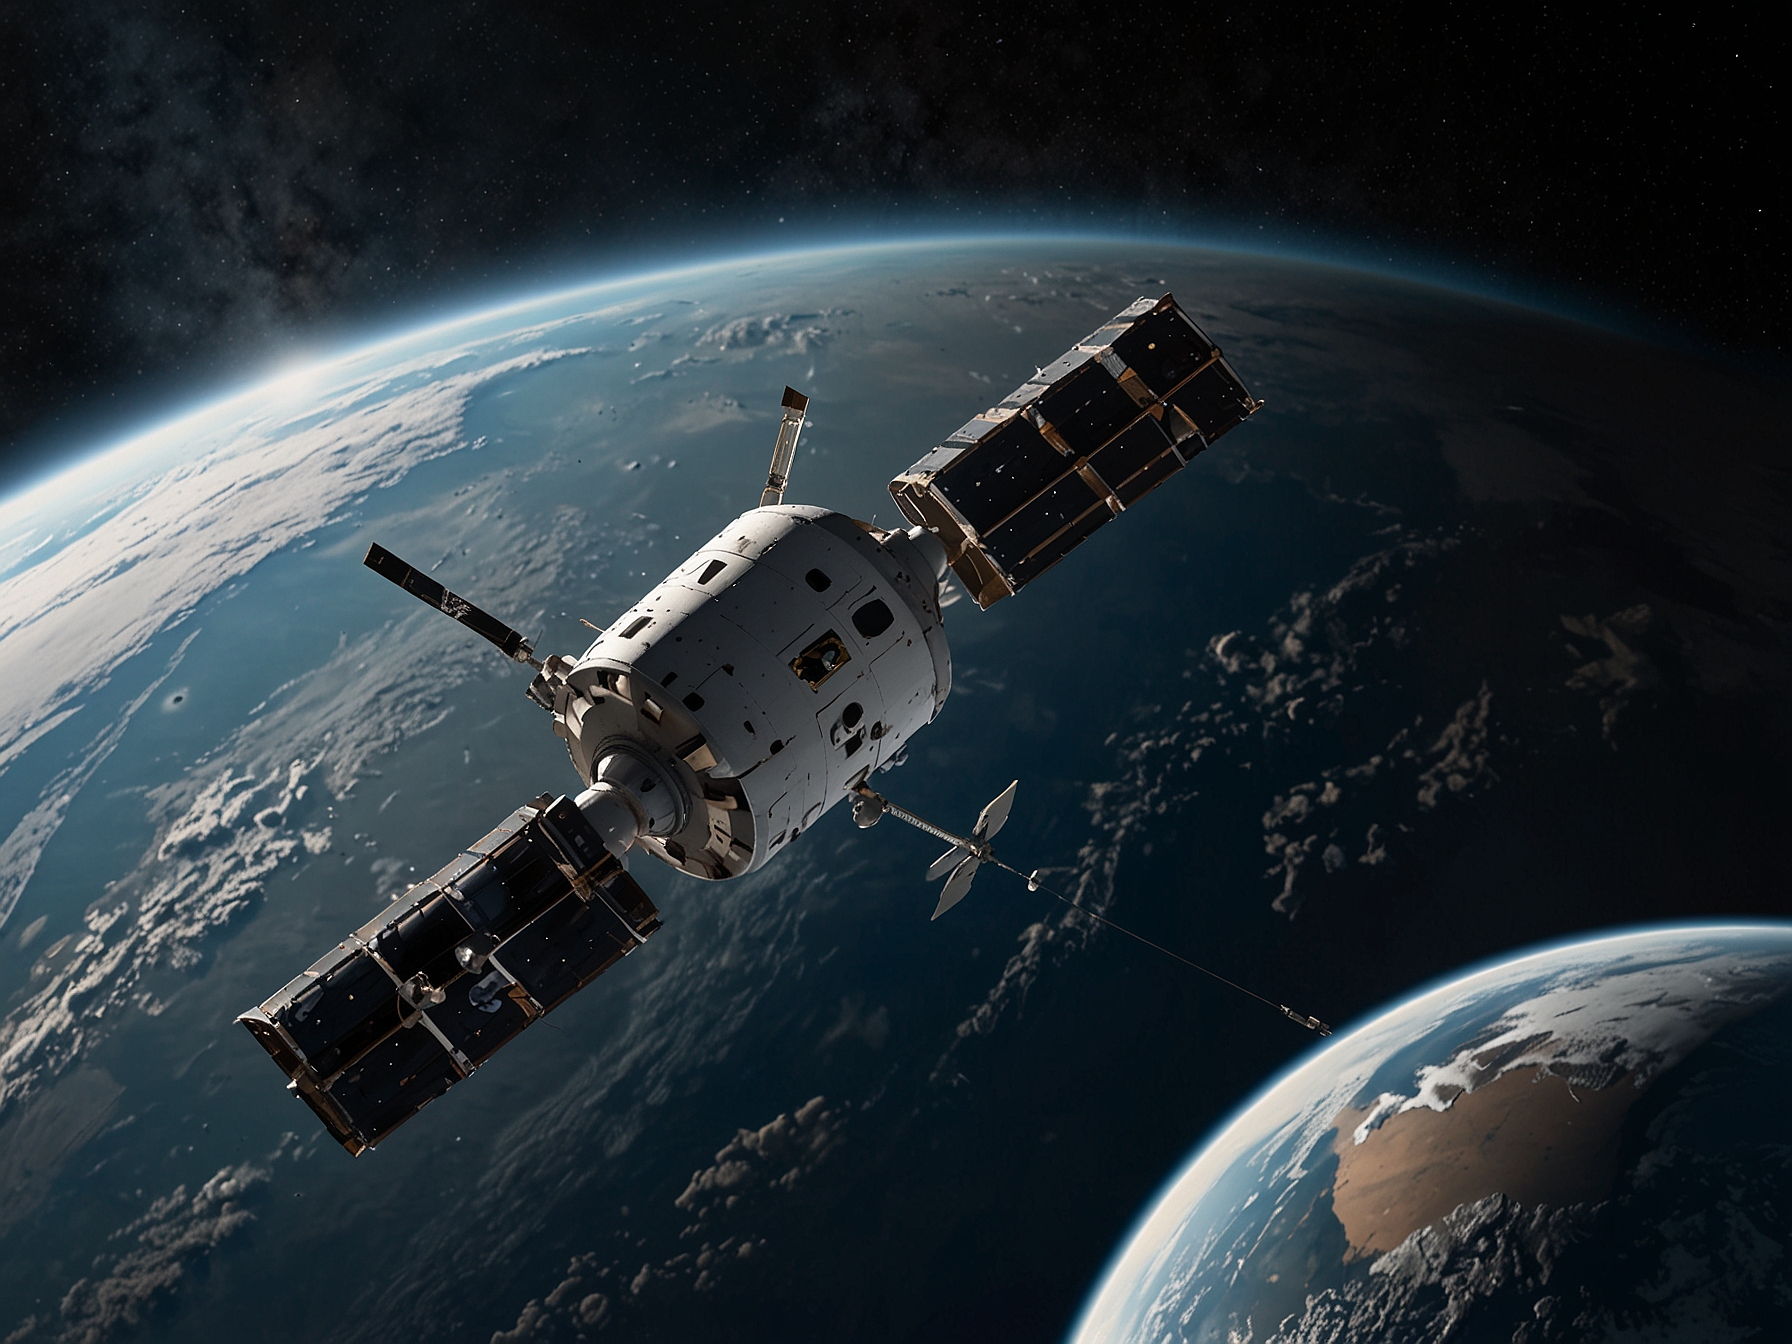 An artist's rendition of NASA's Starliner spacecraft approaching the International Space Station, showcasing the collaborative effort between NASA and Boeing in advancing commercial spaceflight.